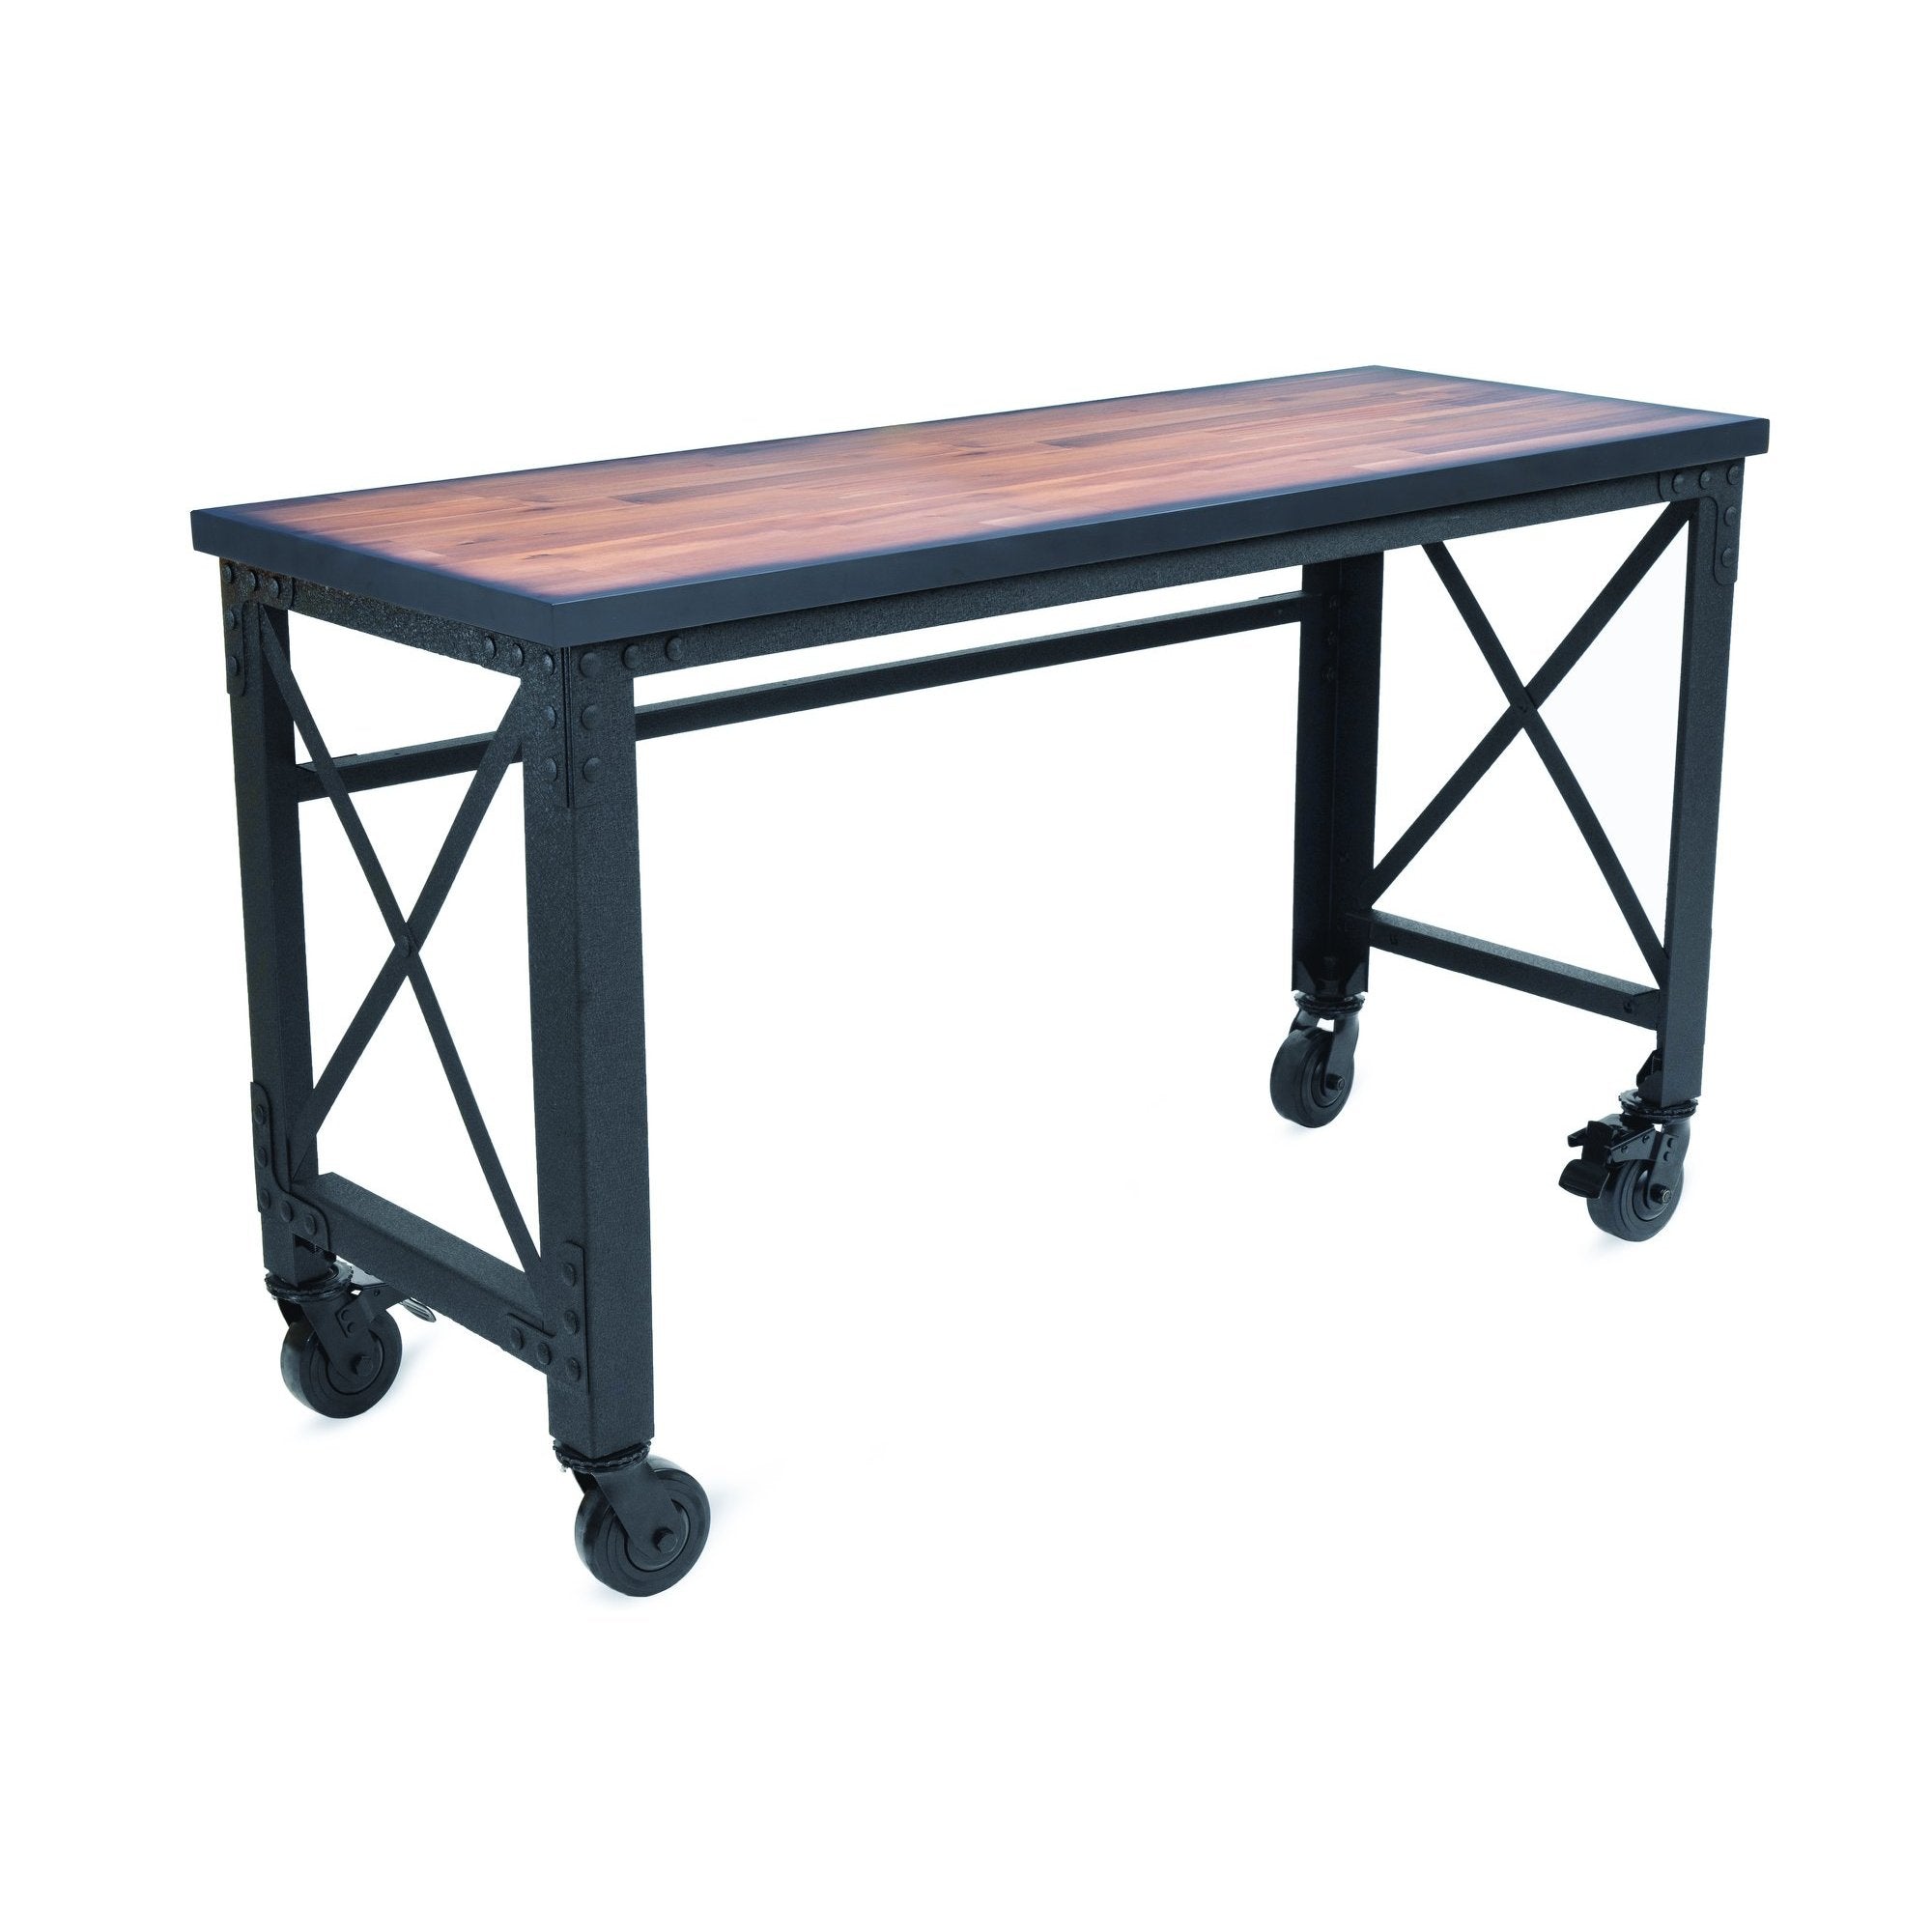 Durasheds furniture 62 in. x 24 in. Duramax Rolling Industrial Desk with Wooden Top (4 Size Options)